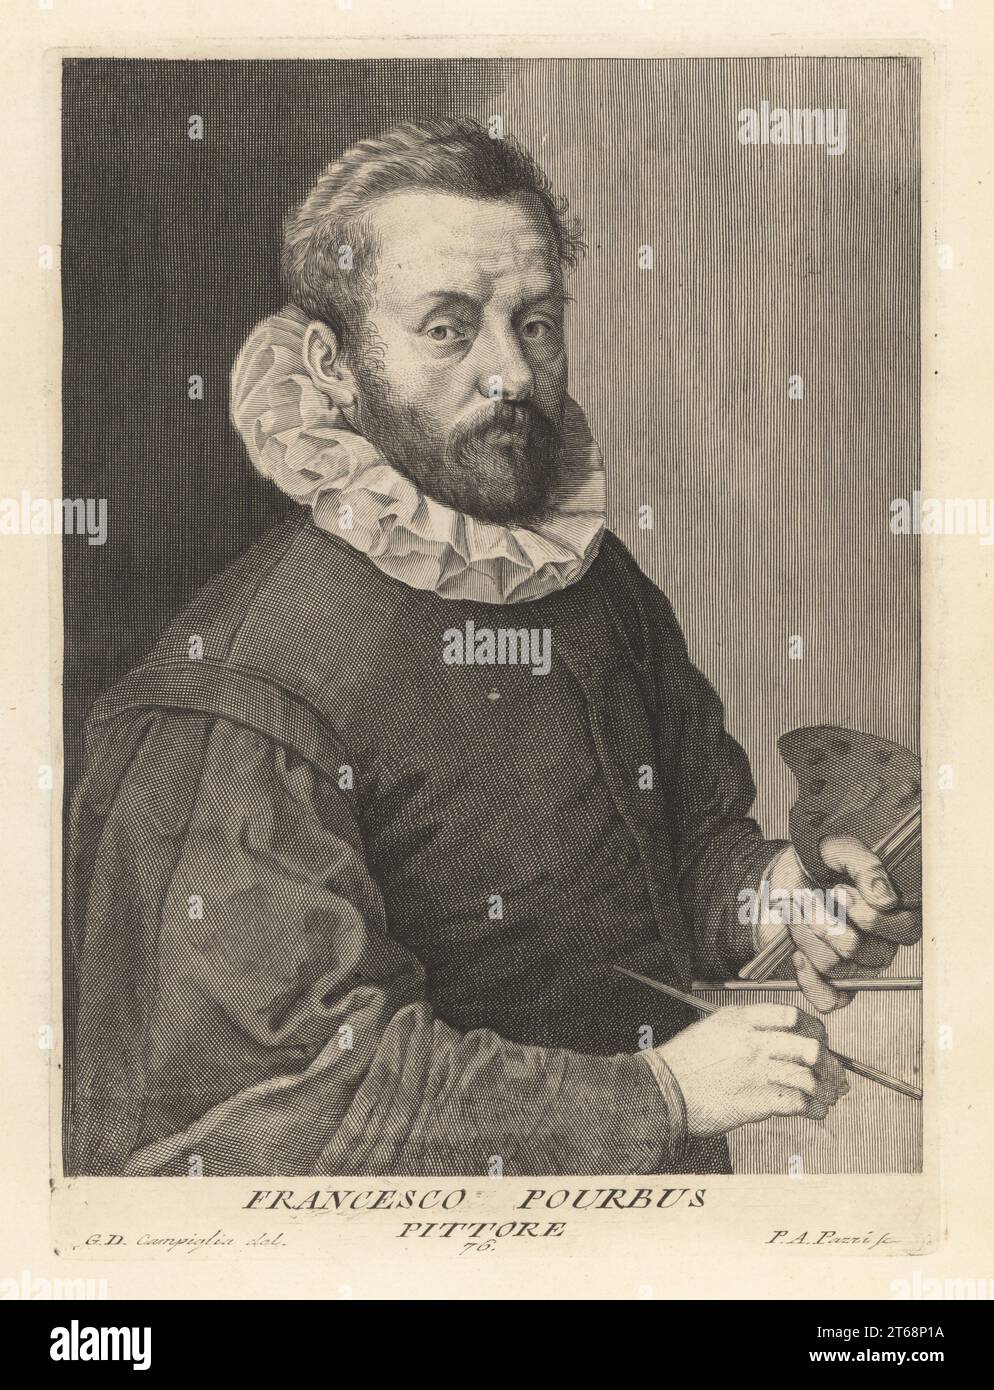 Frans Pourbus the Younger, Flemish portrait painter, son of Frans Pourbus the Elder, 15691622. Painter to Marie de' Medici and the Duke of Mantua. In ruff collar holding paint brushes and oil palette. Francesco Pourbus, Pittore. Copperplate engraving by Pietro Antonio Pazzi after Giovanni Domenico Campiglia after a self portrait by the artist from Francesco Moucke's Museo Florentino (Museum Florentinum), Serie di Ritratti de Pittori (Series of Portraits of Painters) stamperia Mouckiana, Florence, 1752-62. Stock Photo